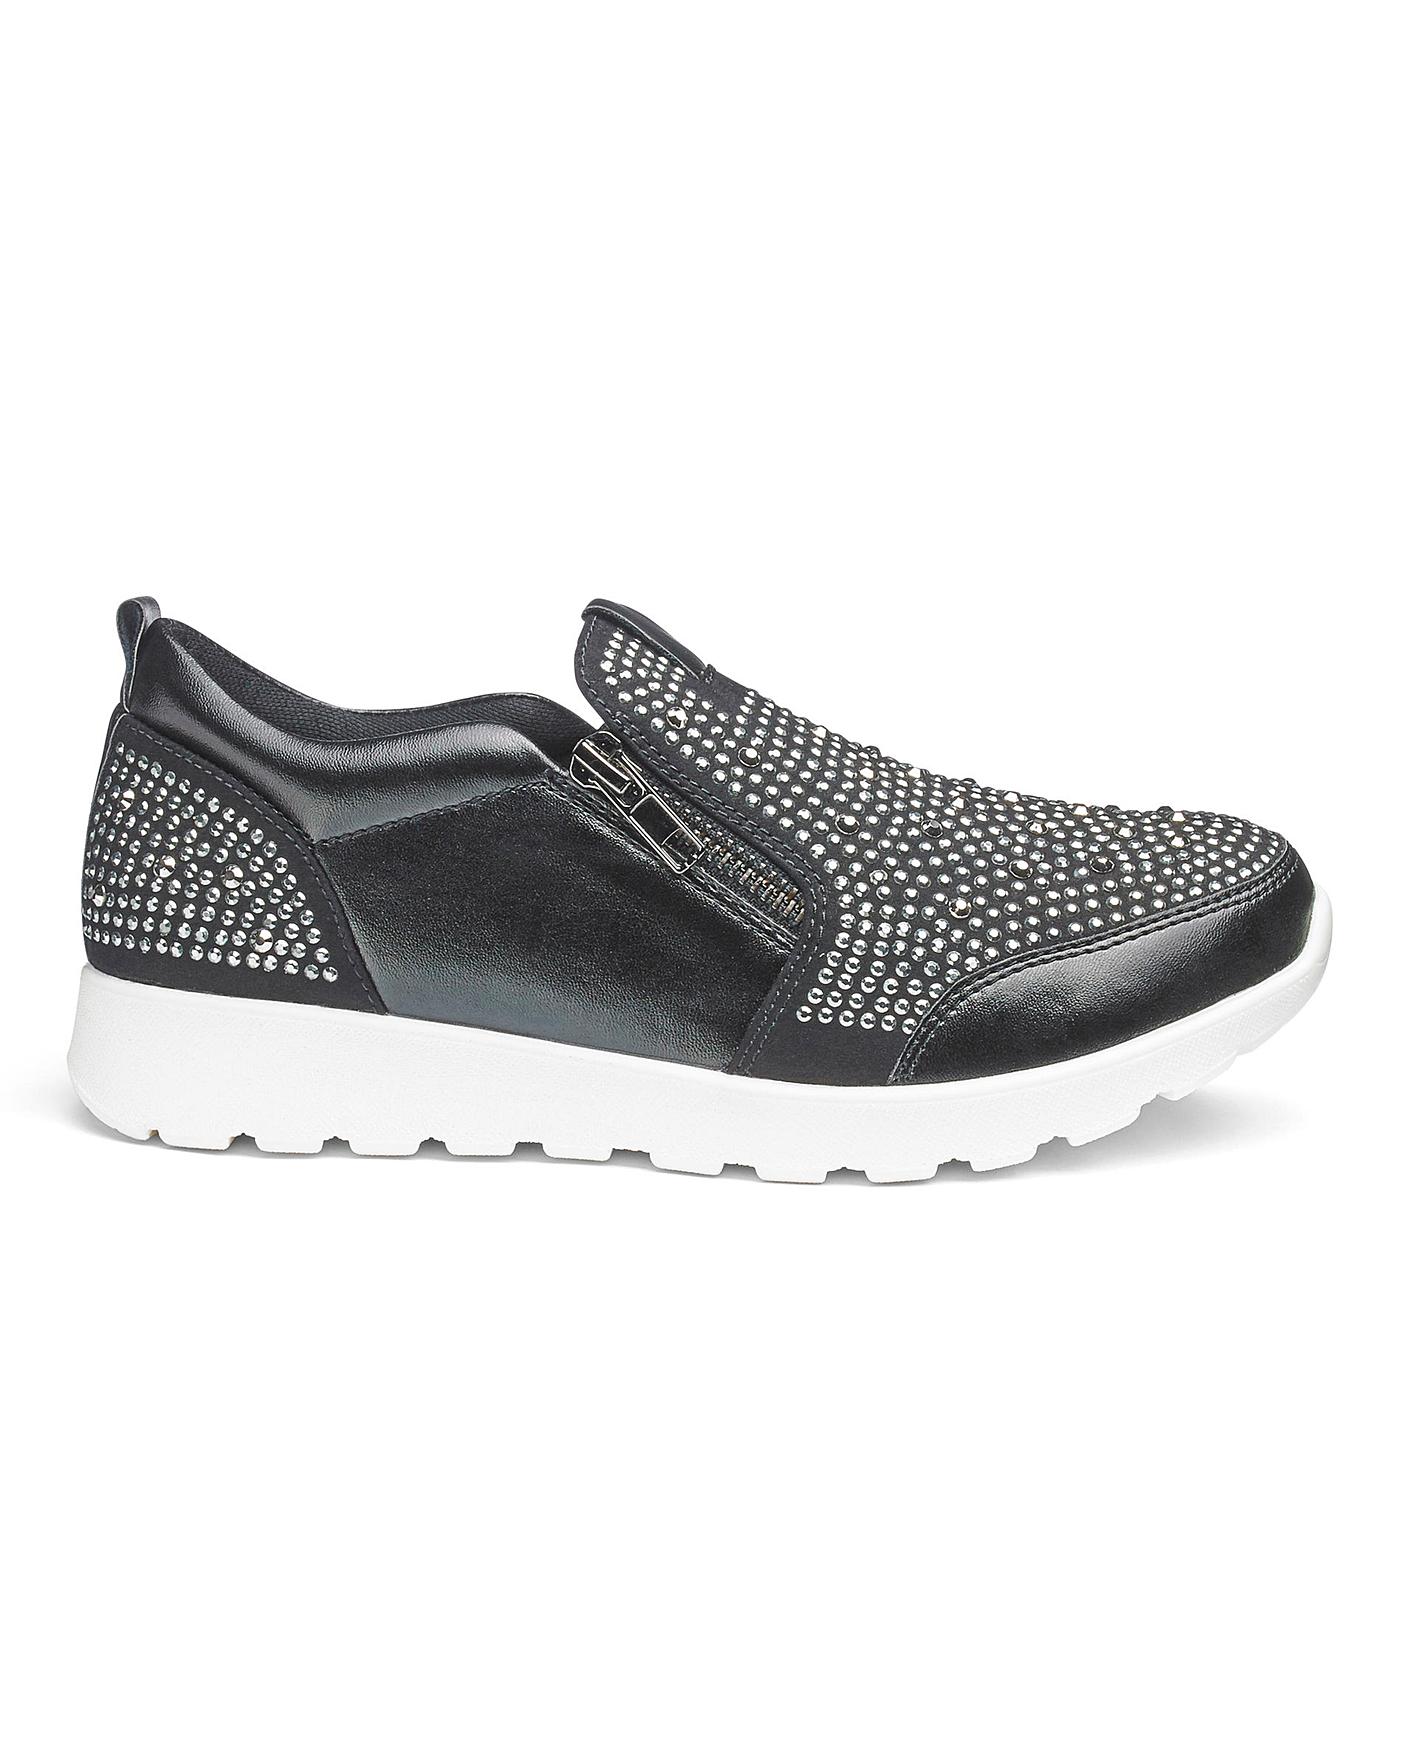 slip on leisure shoes